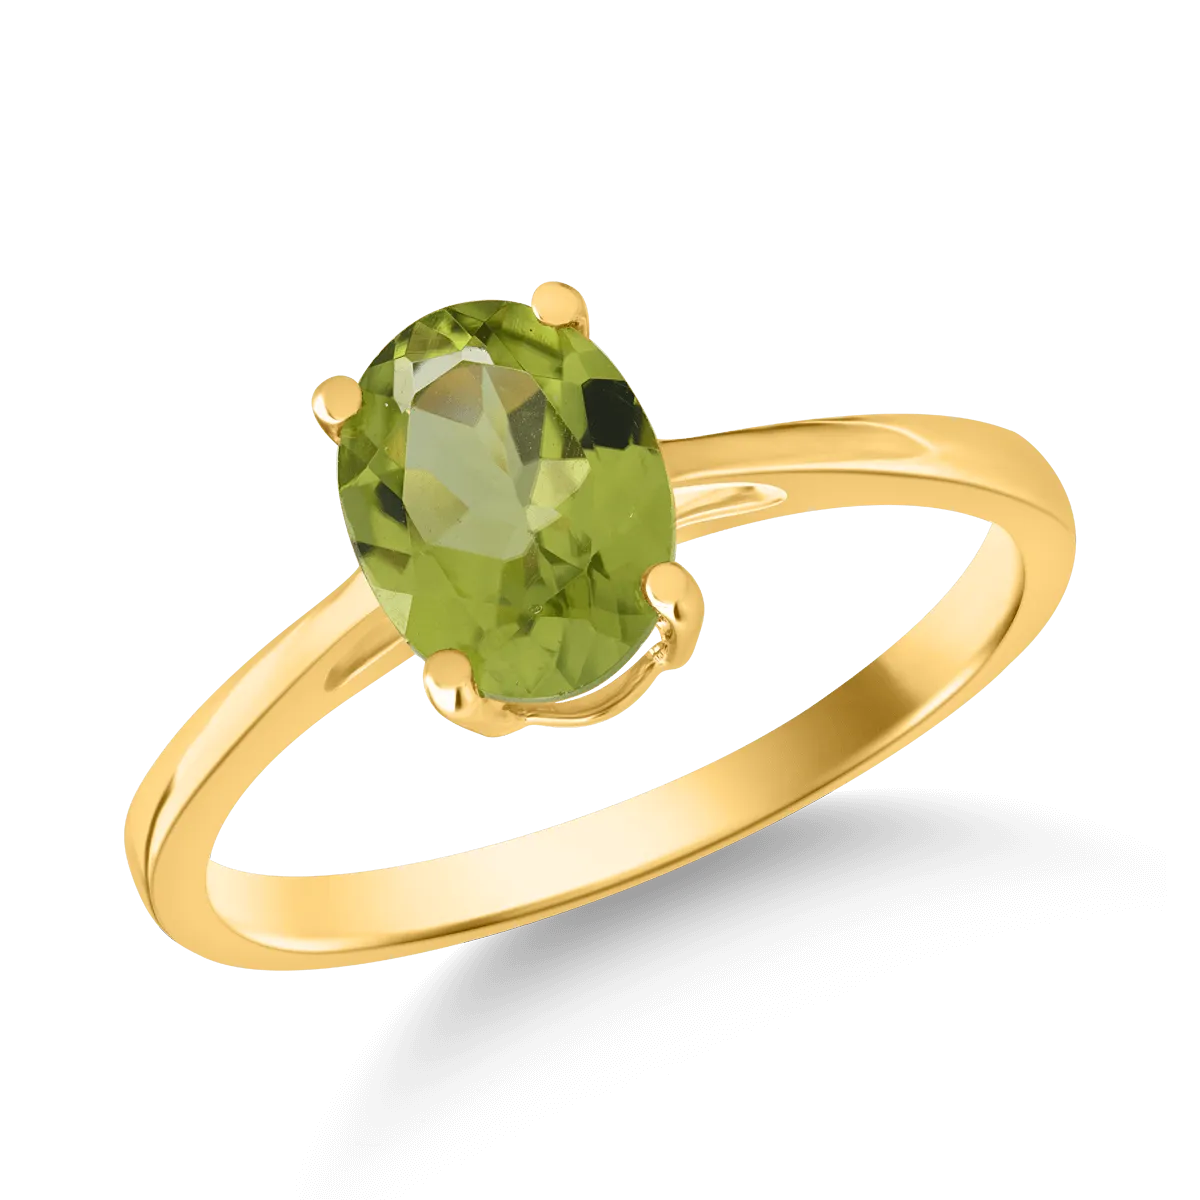 14K yellow gold ring with 1.23ct peridot